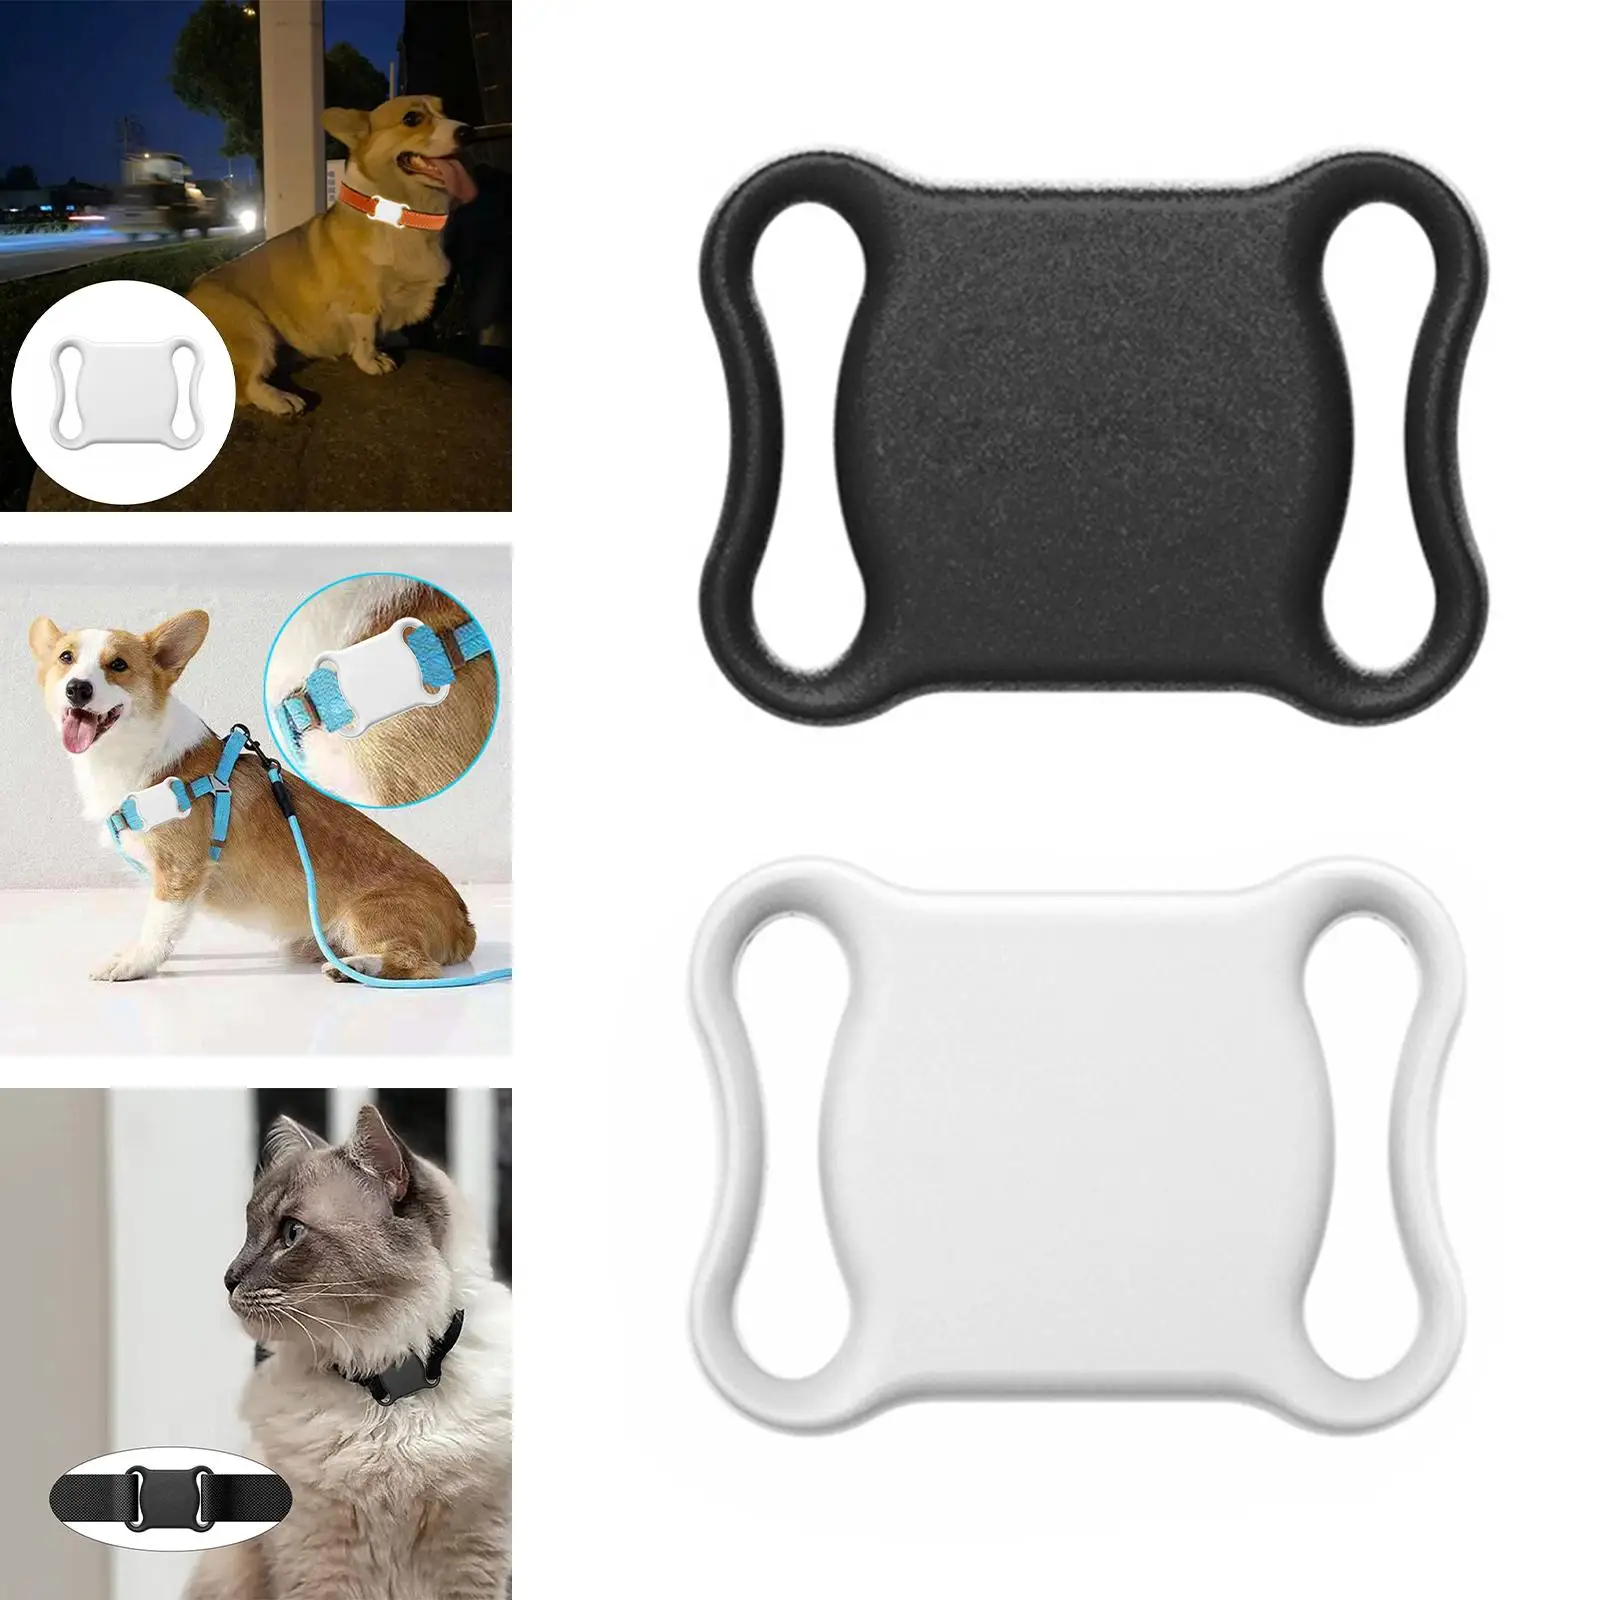 Pet GPS Tracker Works with Any Collar Built in Night Light Real Time Tracking Device for Elderly